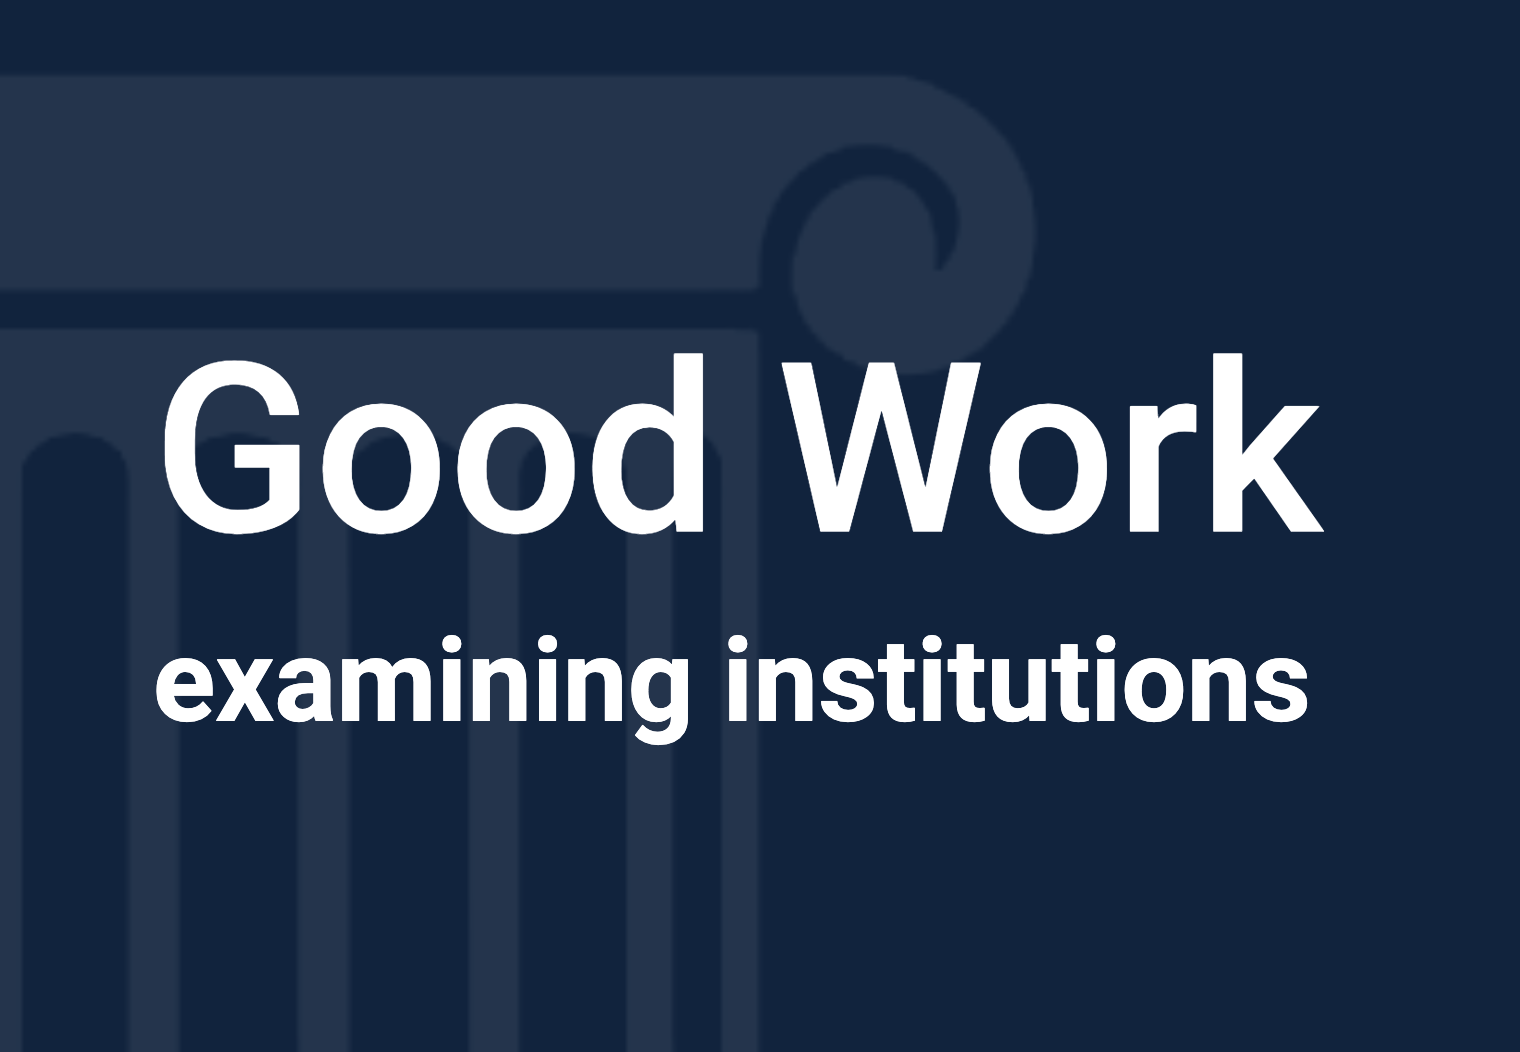 Good Work: examining institutions cover image.